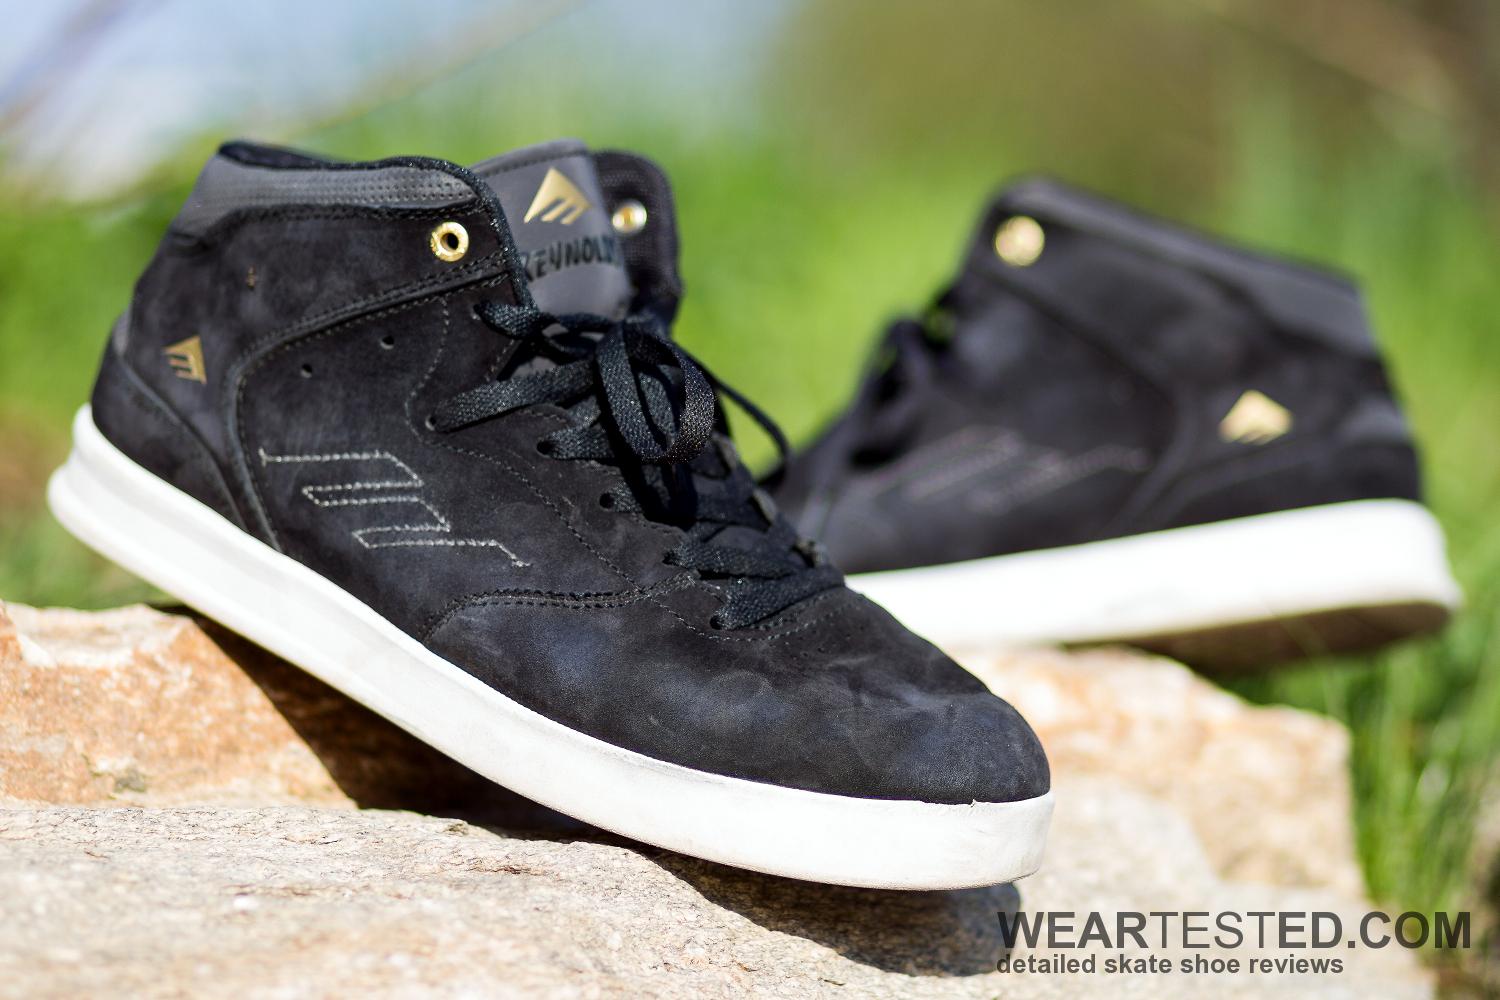 Guest-review: the Emerica Reynolds